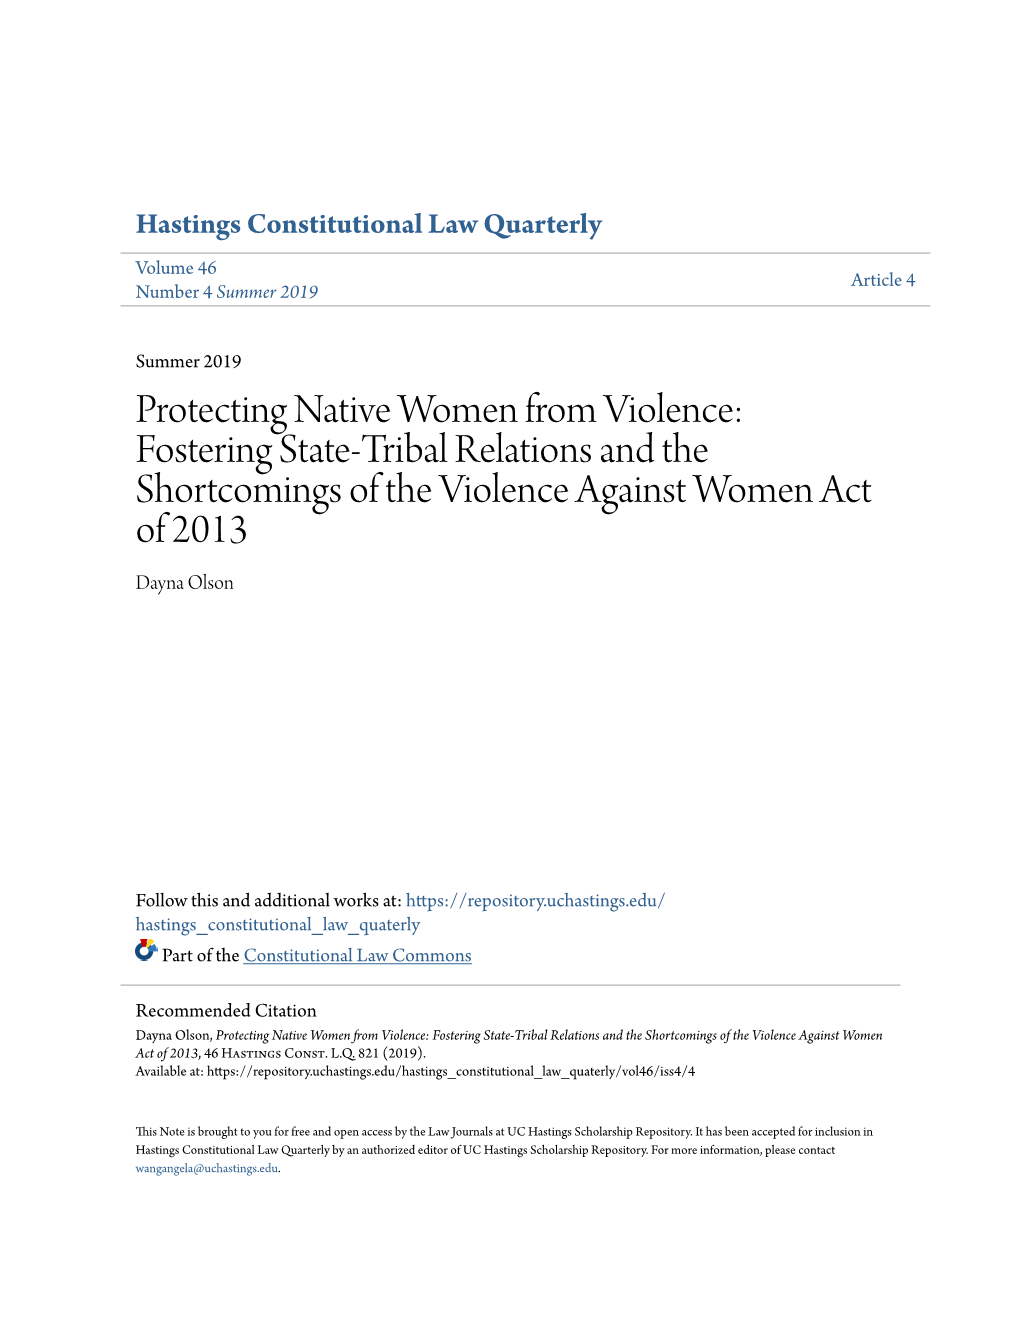 Protecting Native Women from Violence: Fostering State-Tribal Relations and the Shortcomings of the Violence Against Women Act of 2013 Dayna Olson